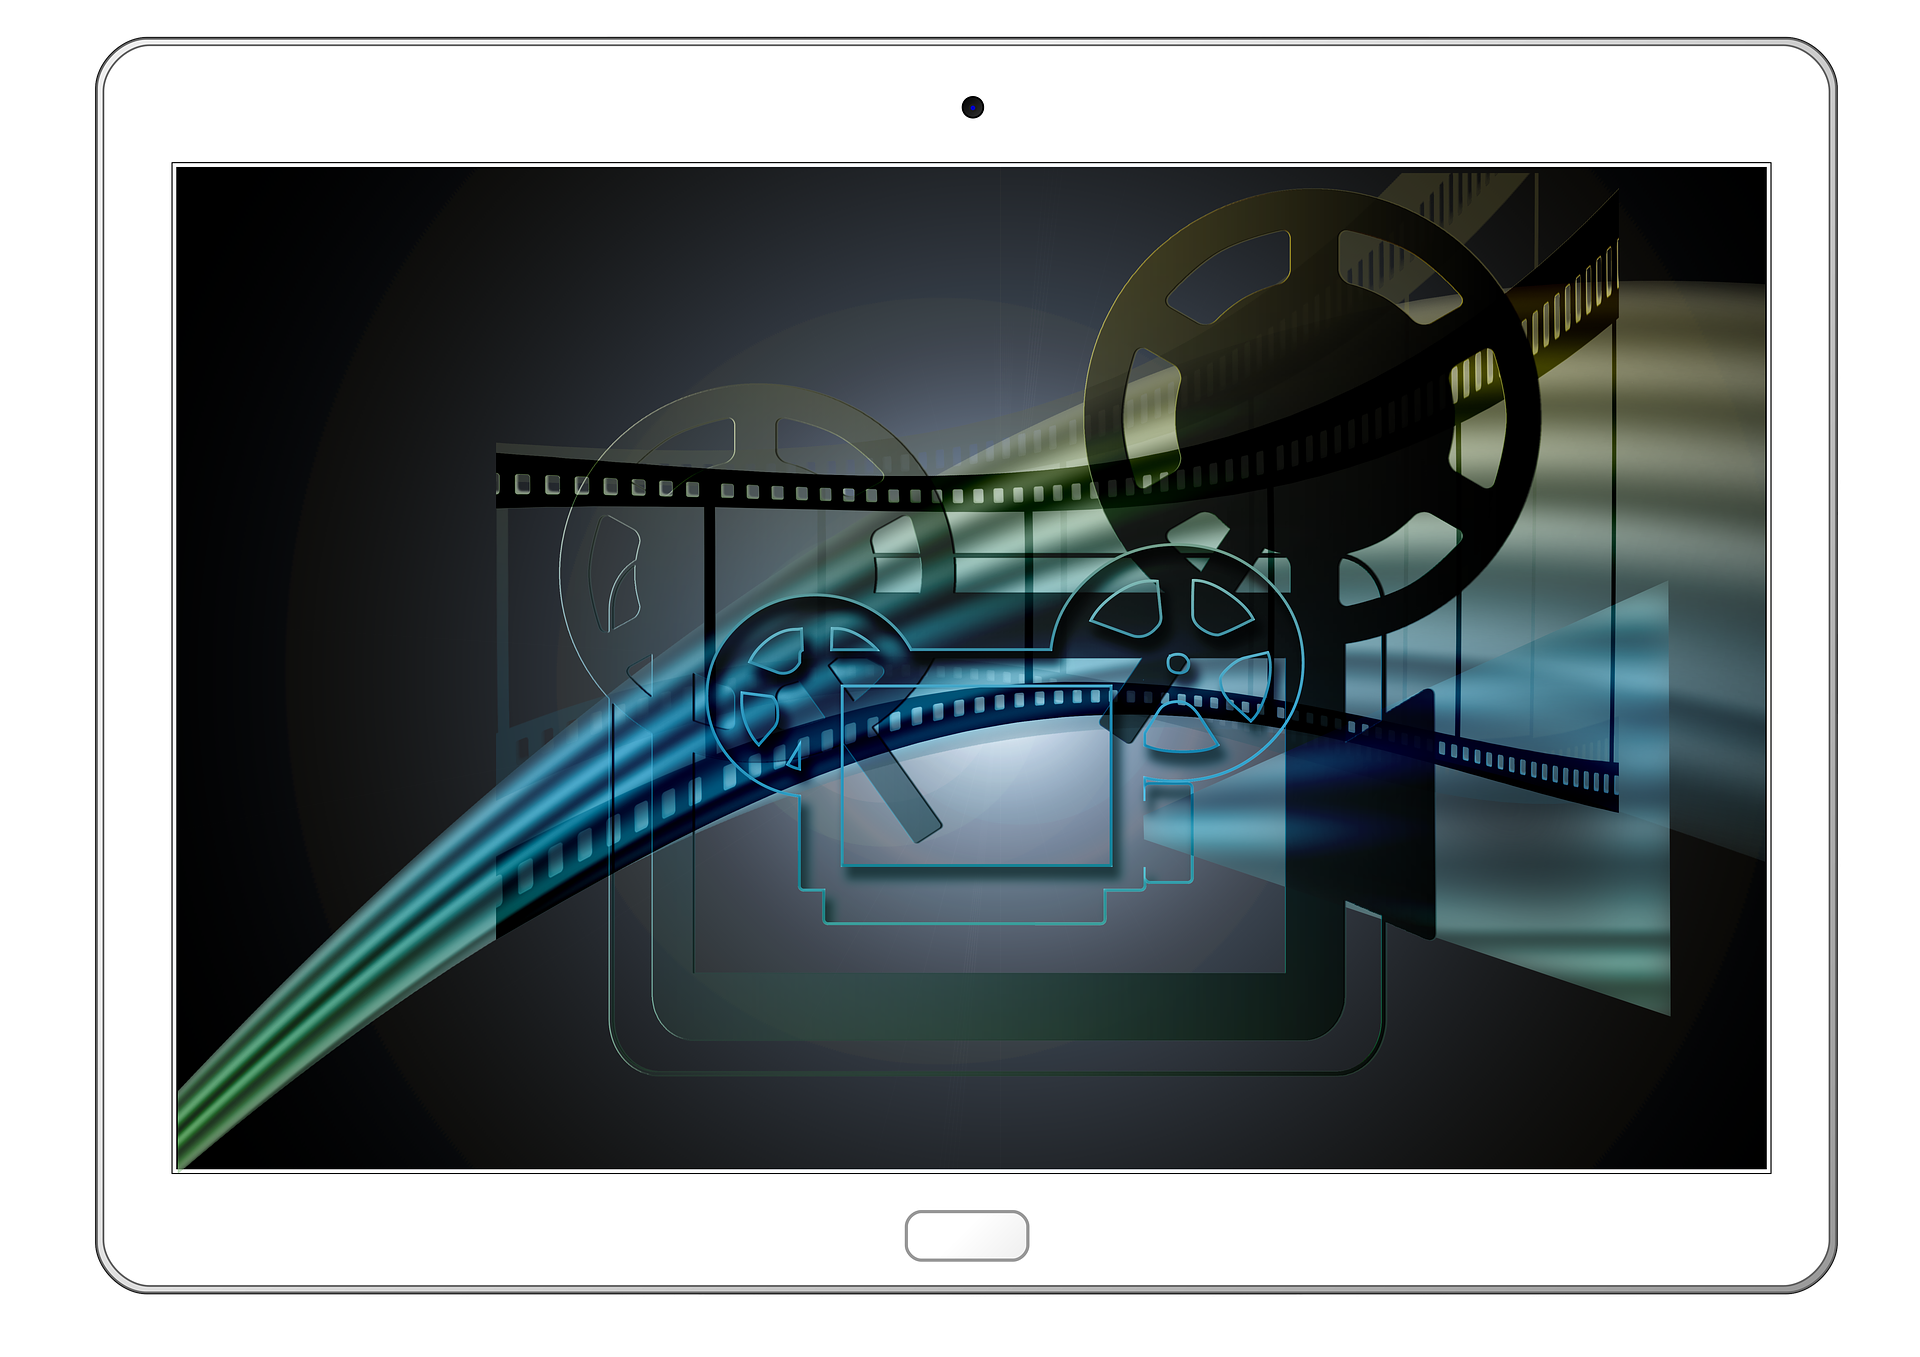 How to Record the Screen with IObit Screen Recorder